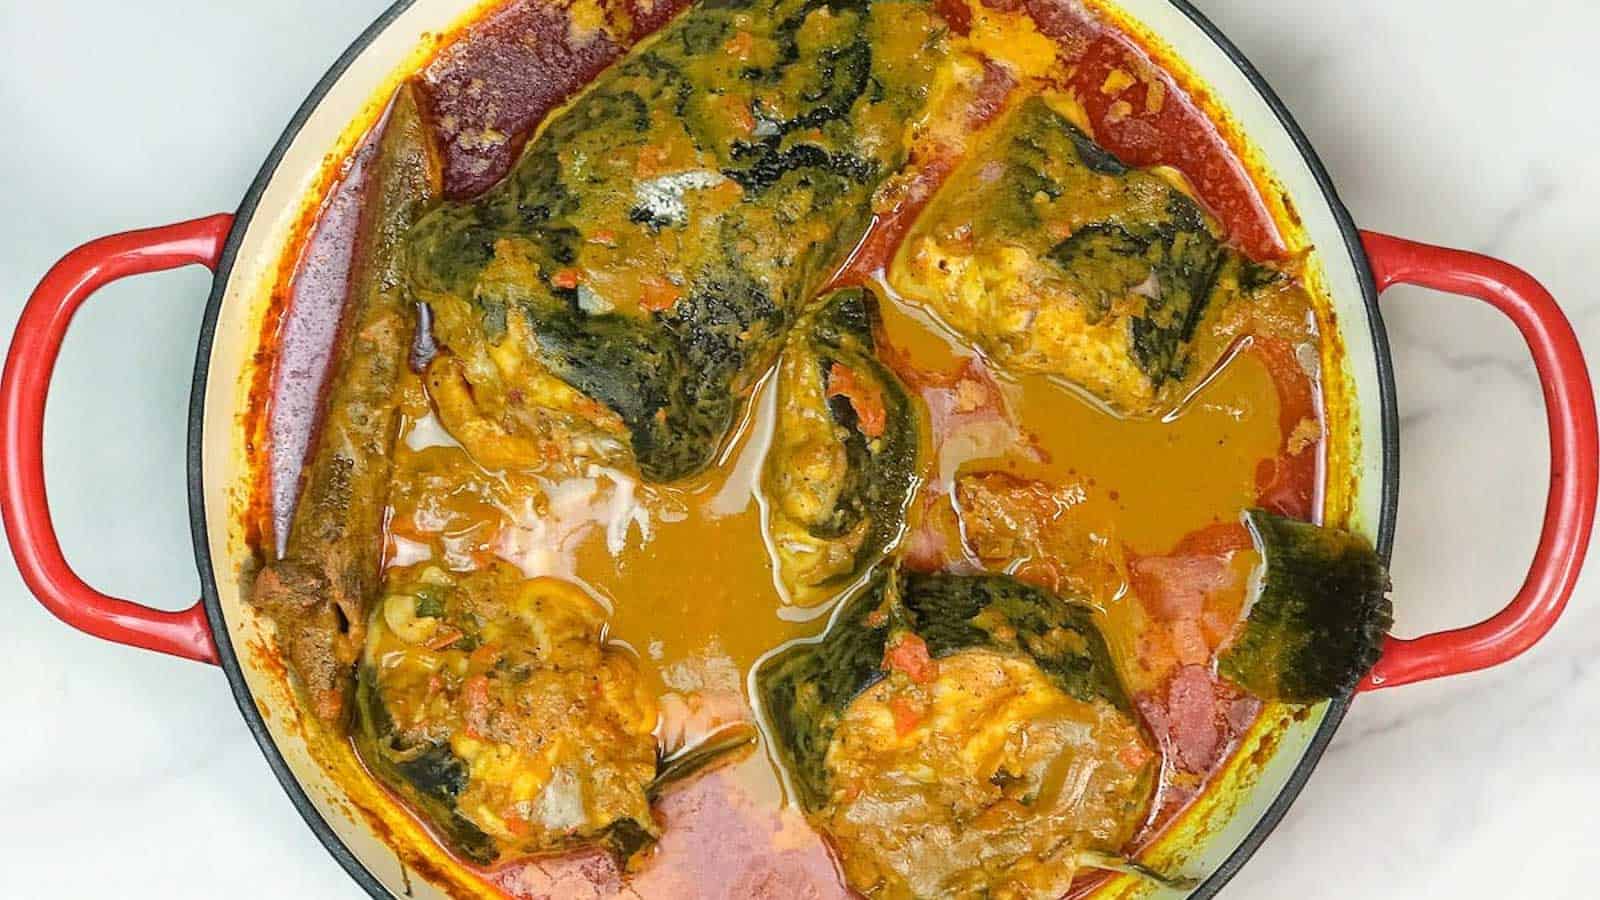 Banga Soup, a unique blend of palm nuts, assorted meats, and African spices.